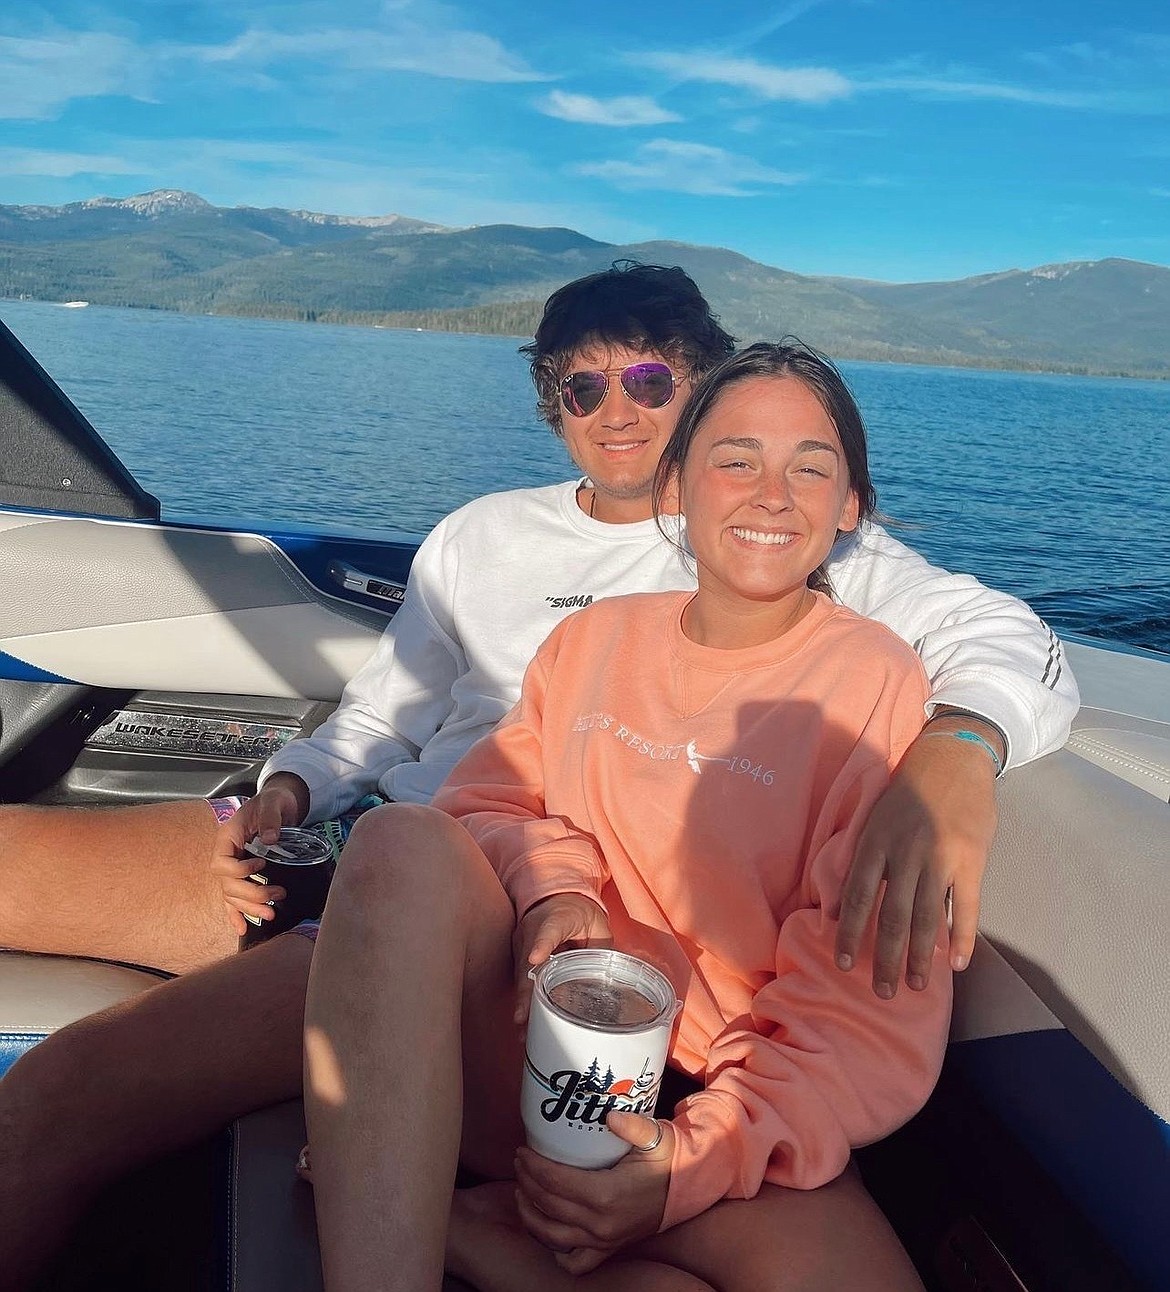 his July 2022 photo provided by Jazzmin Kernodle shows University of Idaho students Xana Kernodle, right, and Ethan Chapin on a boat on Priest Lake, in Idaho. Both students were among four found stabbed to death in an off-campus rental home on Nov. 13. (Jazzmin Kernodle via AP)